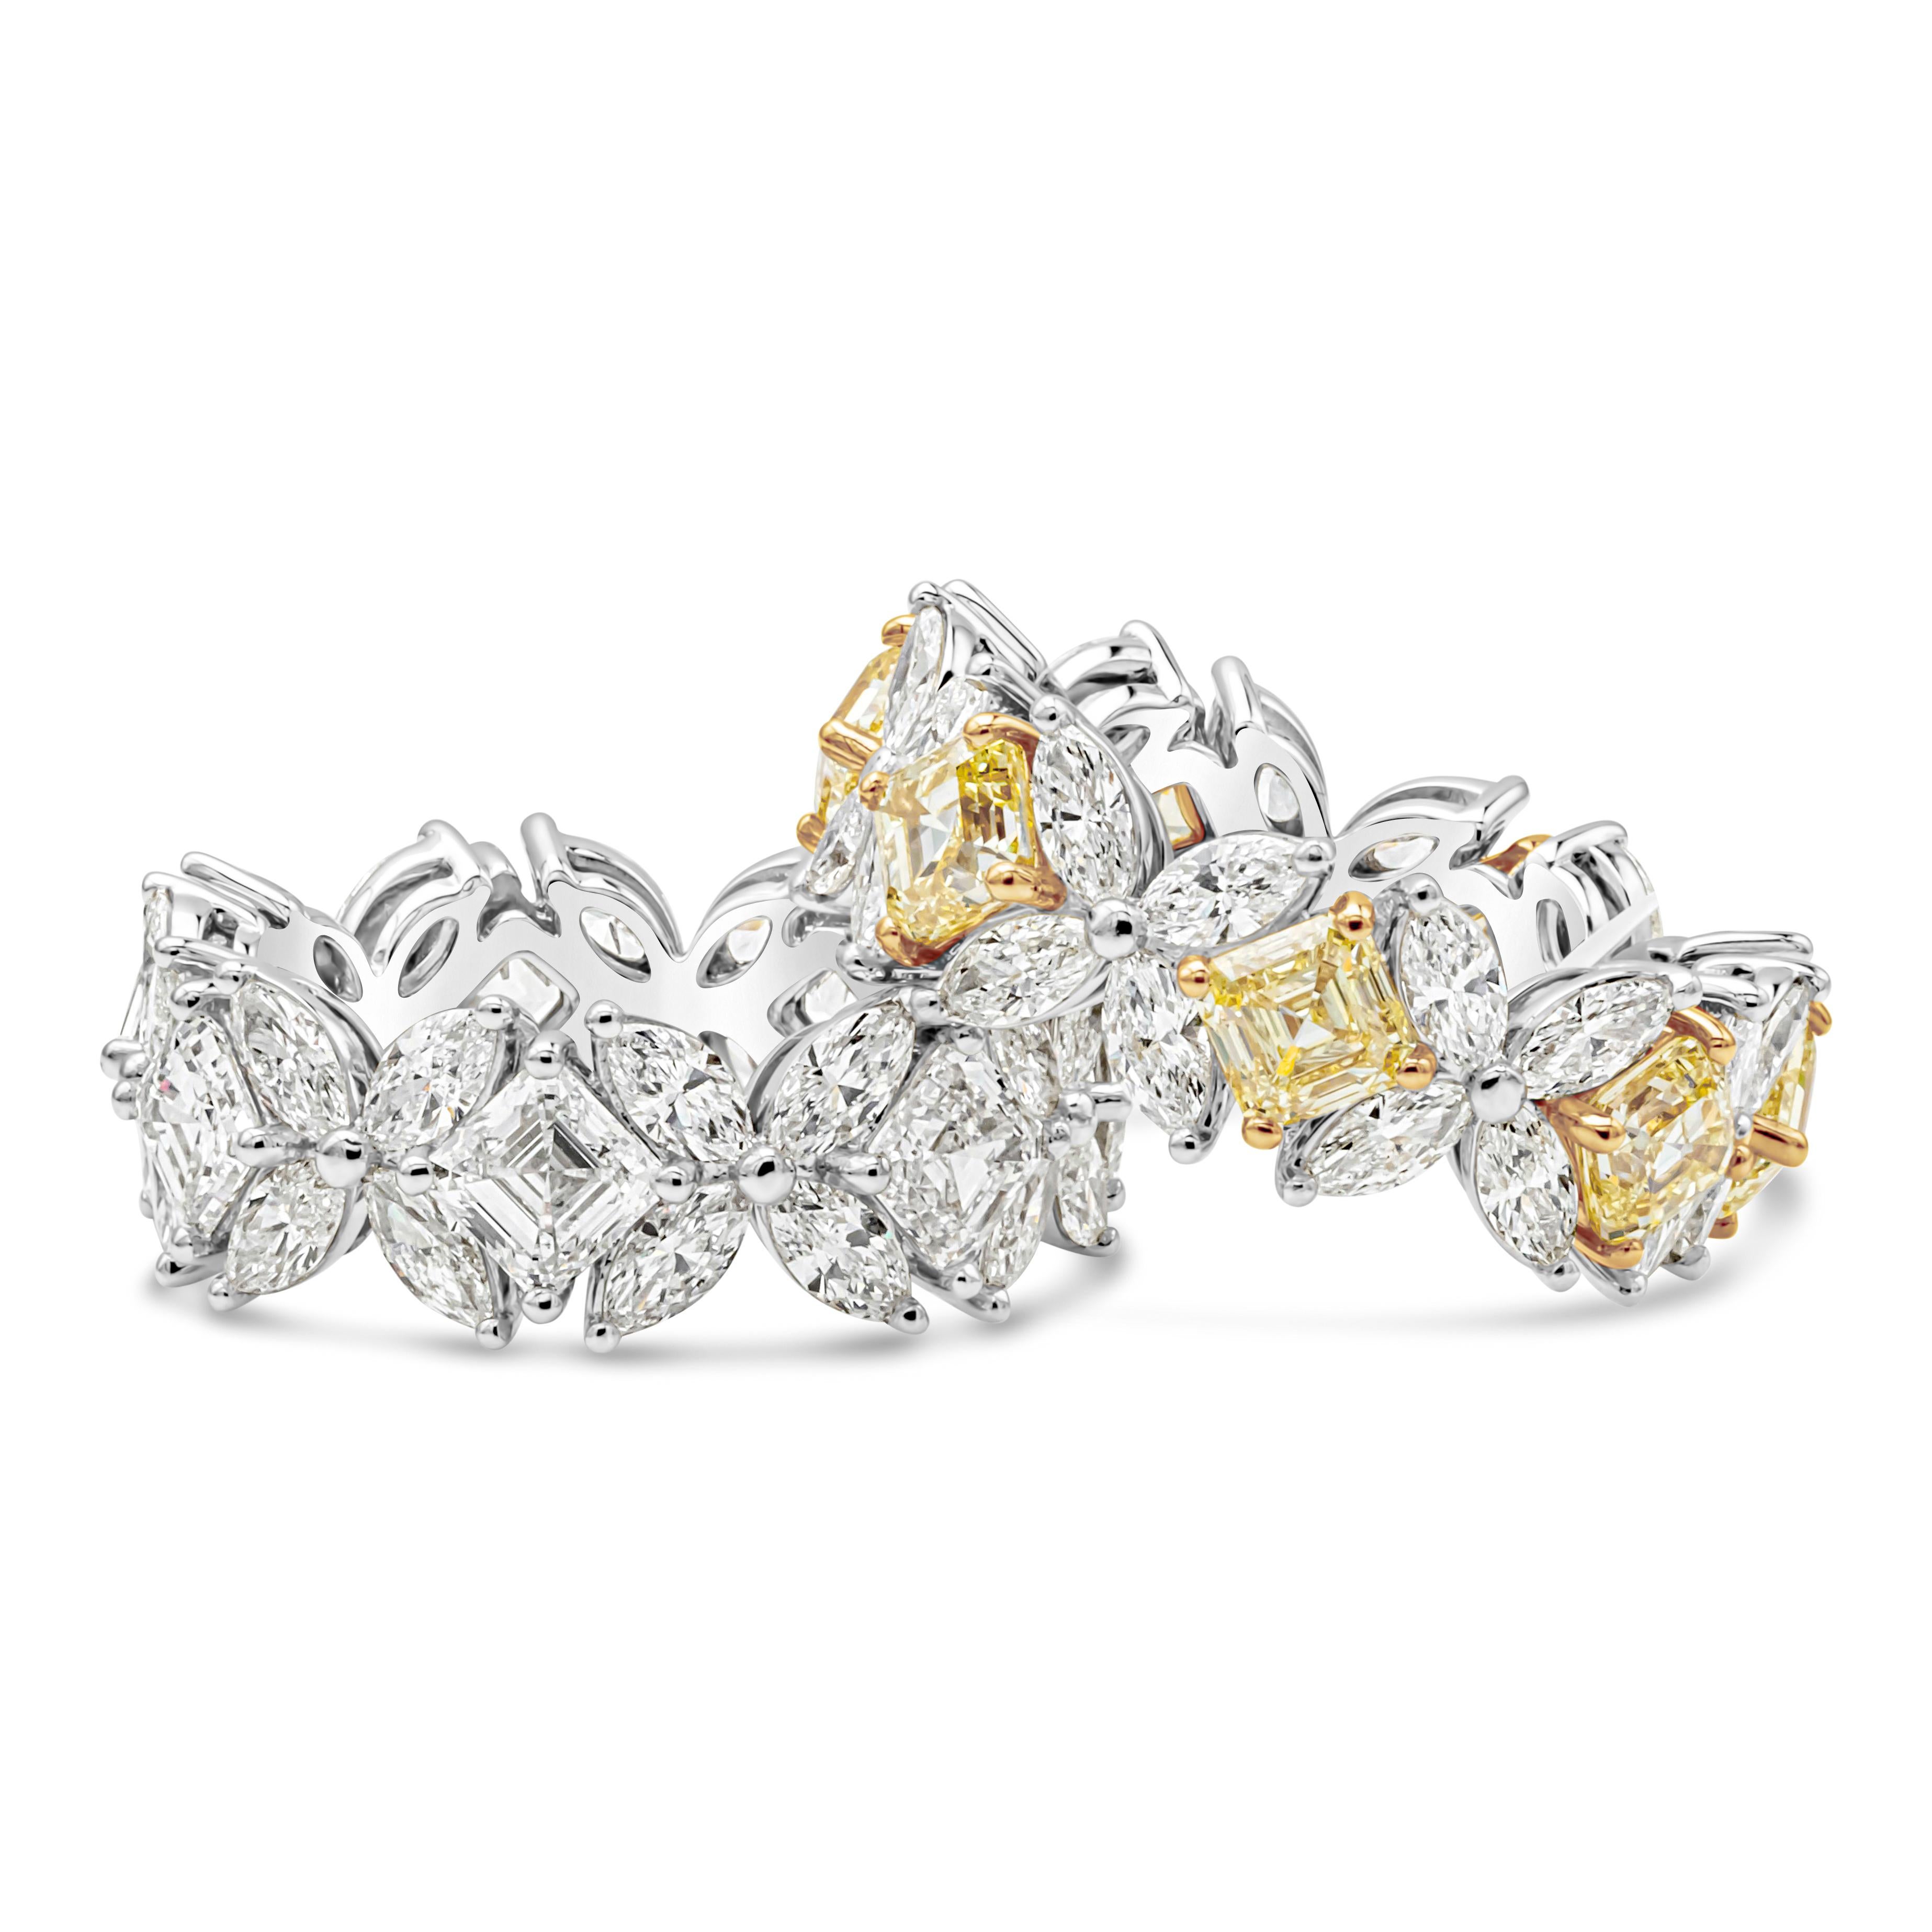 Contemporary 6.35 Carats Total Mixed Cut Fancy Intense Yellow & White Diamond Band For Sale